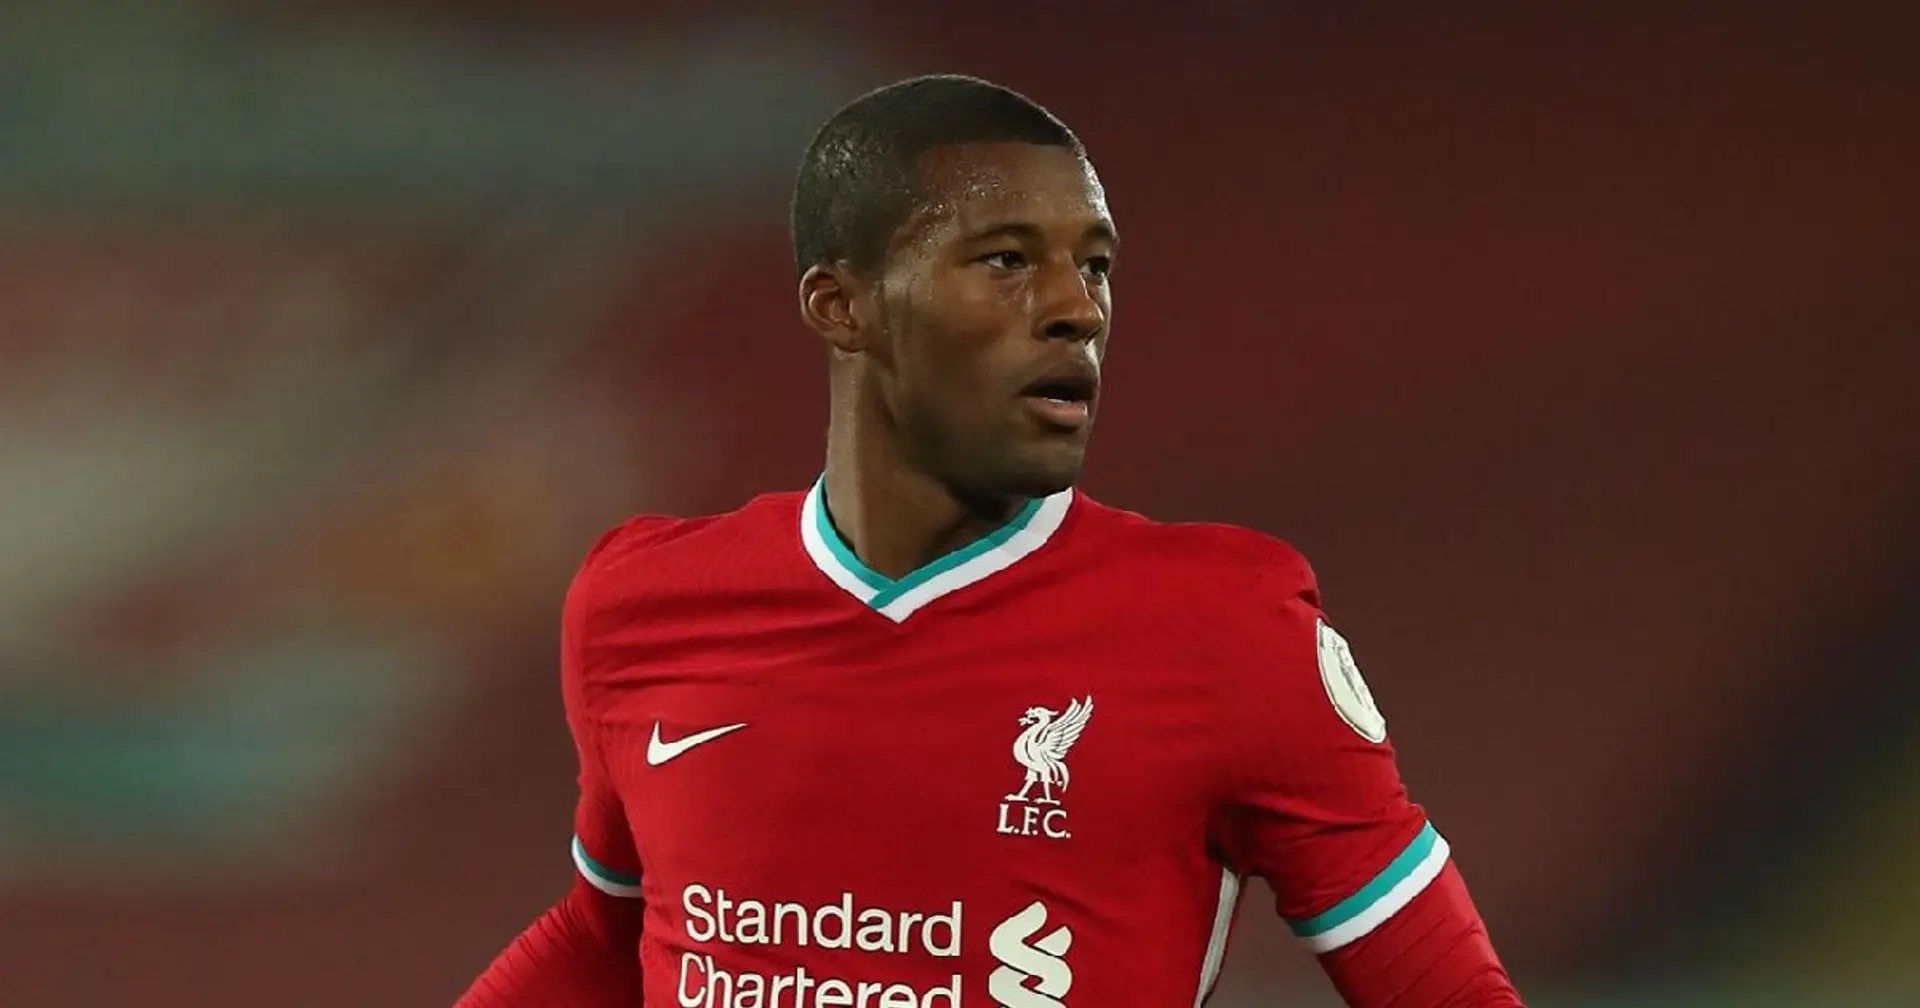 4 pros and 2 cons of offering Wijnaldum a new contract